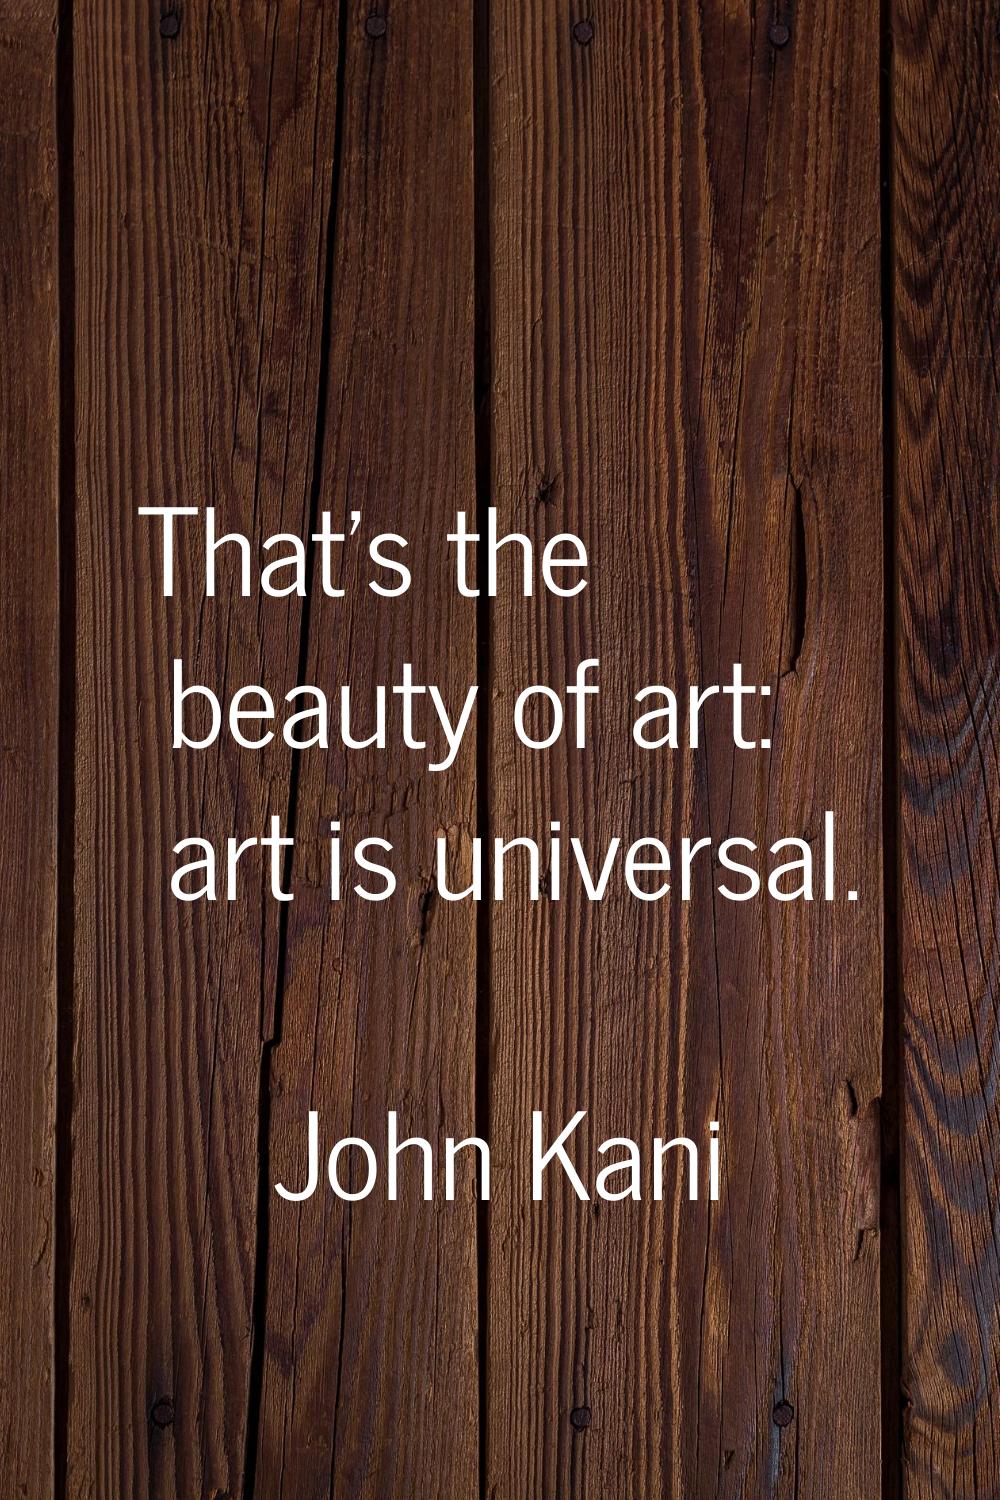 That's the beauty of art: art is universal.